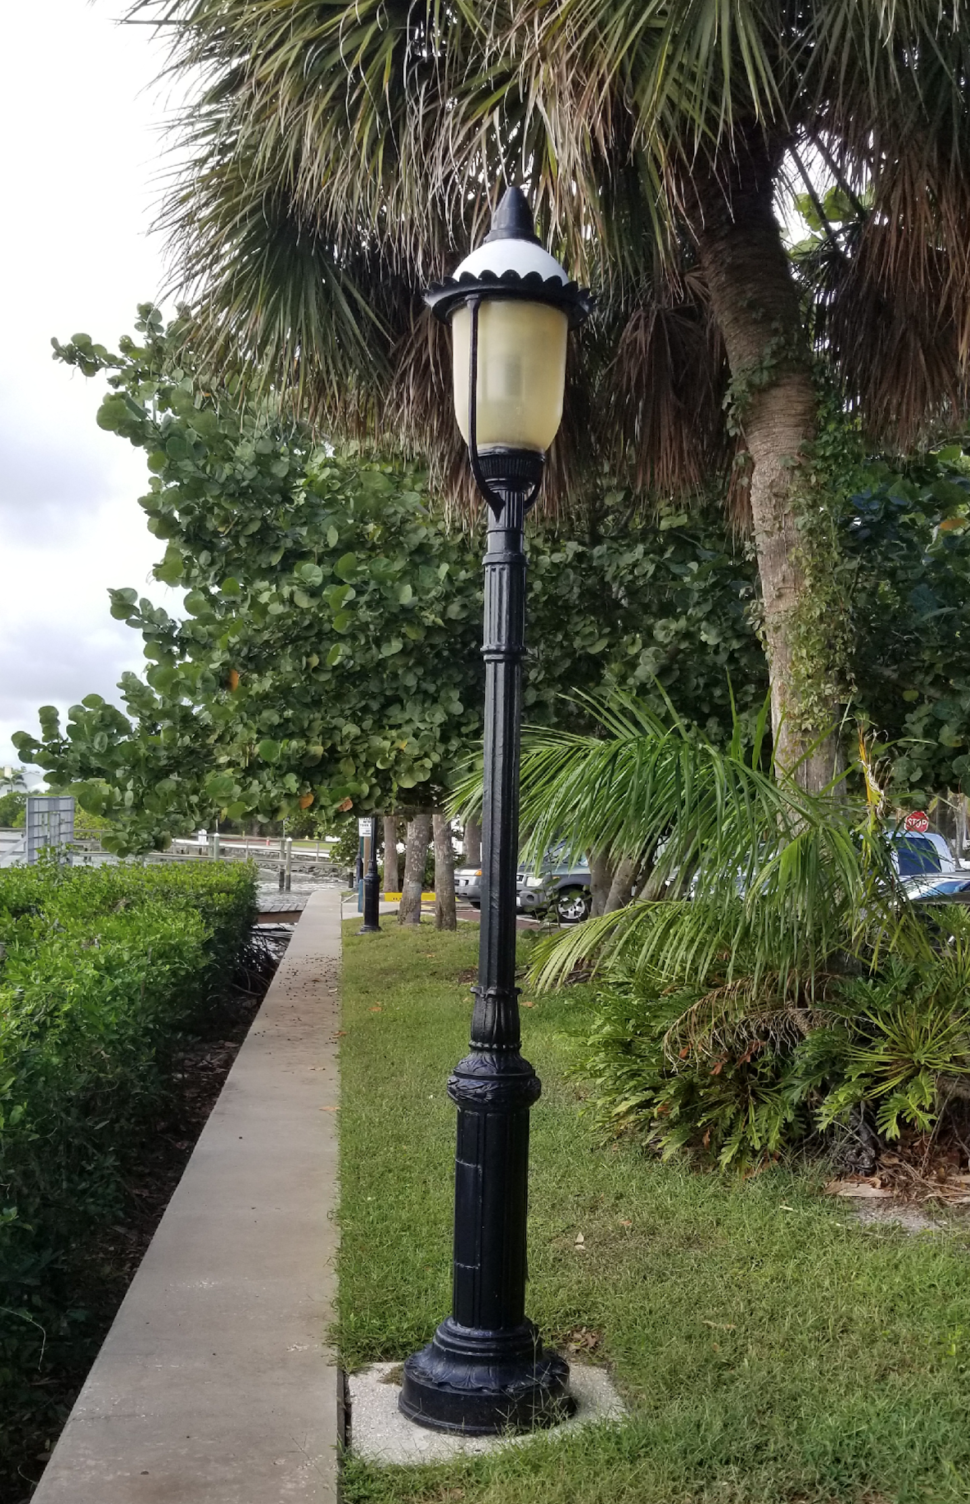 Village resident Pete Rowan provided this example of a street light in Palmetto for what he would like to see installed in the town of Longboat Key.